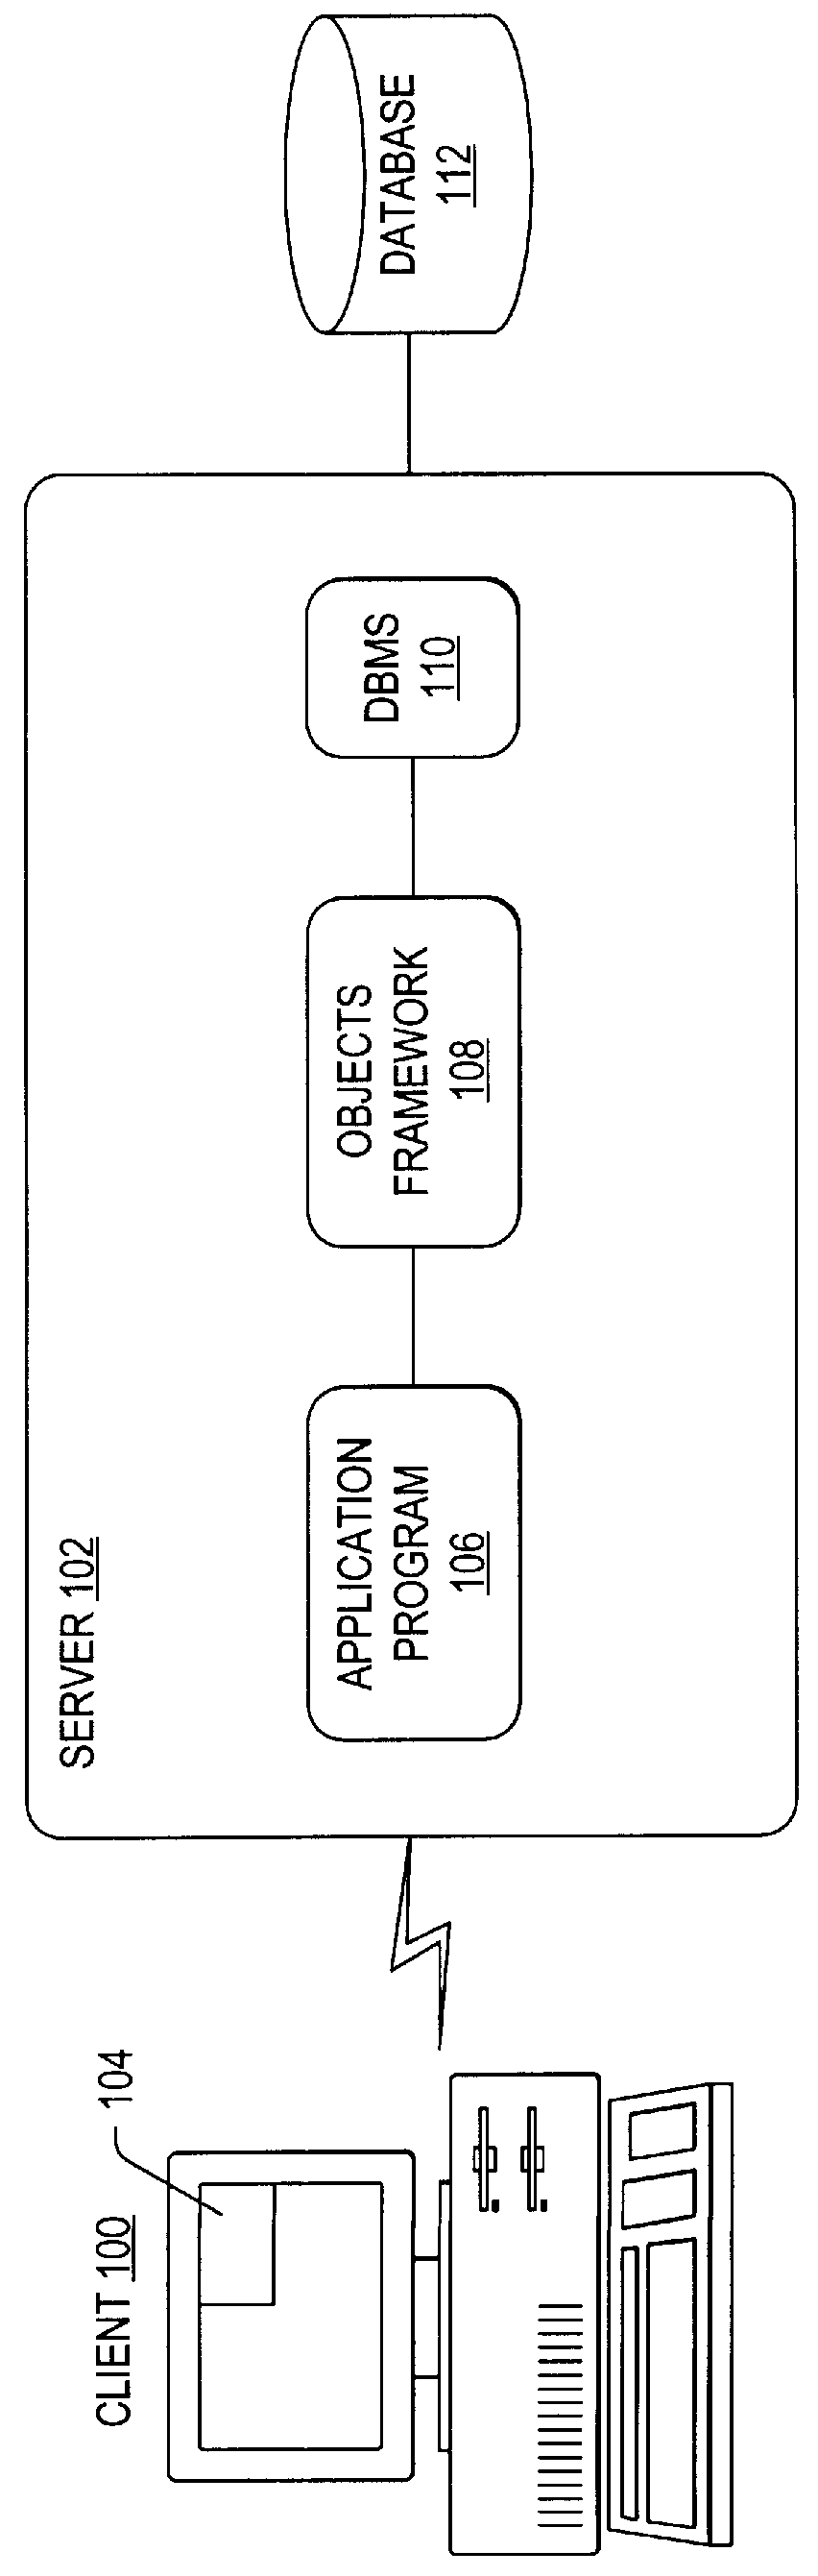 Internet-enabled generic application program for accessing hierarchical data